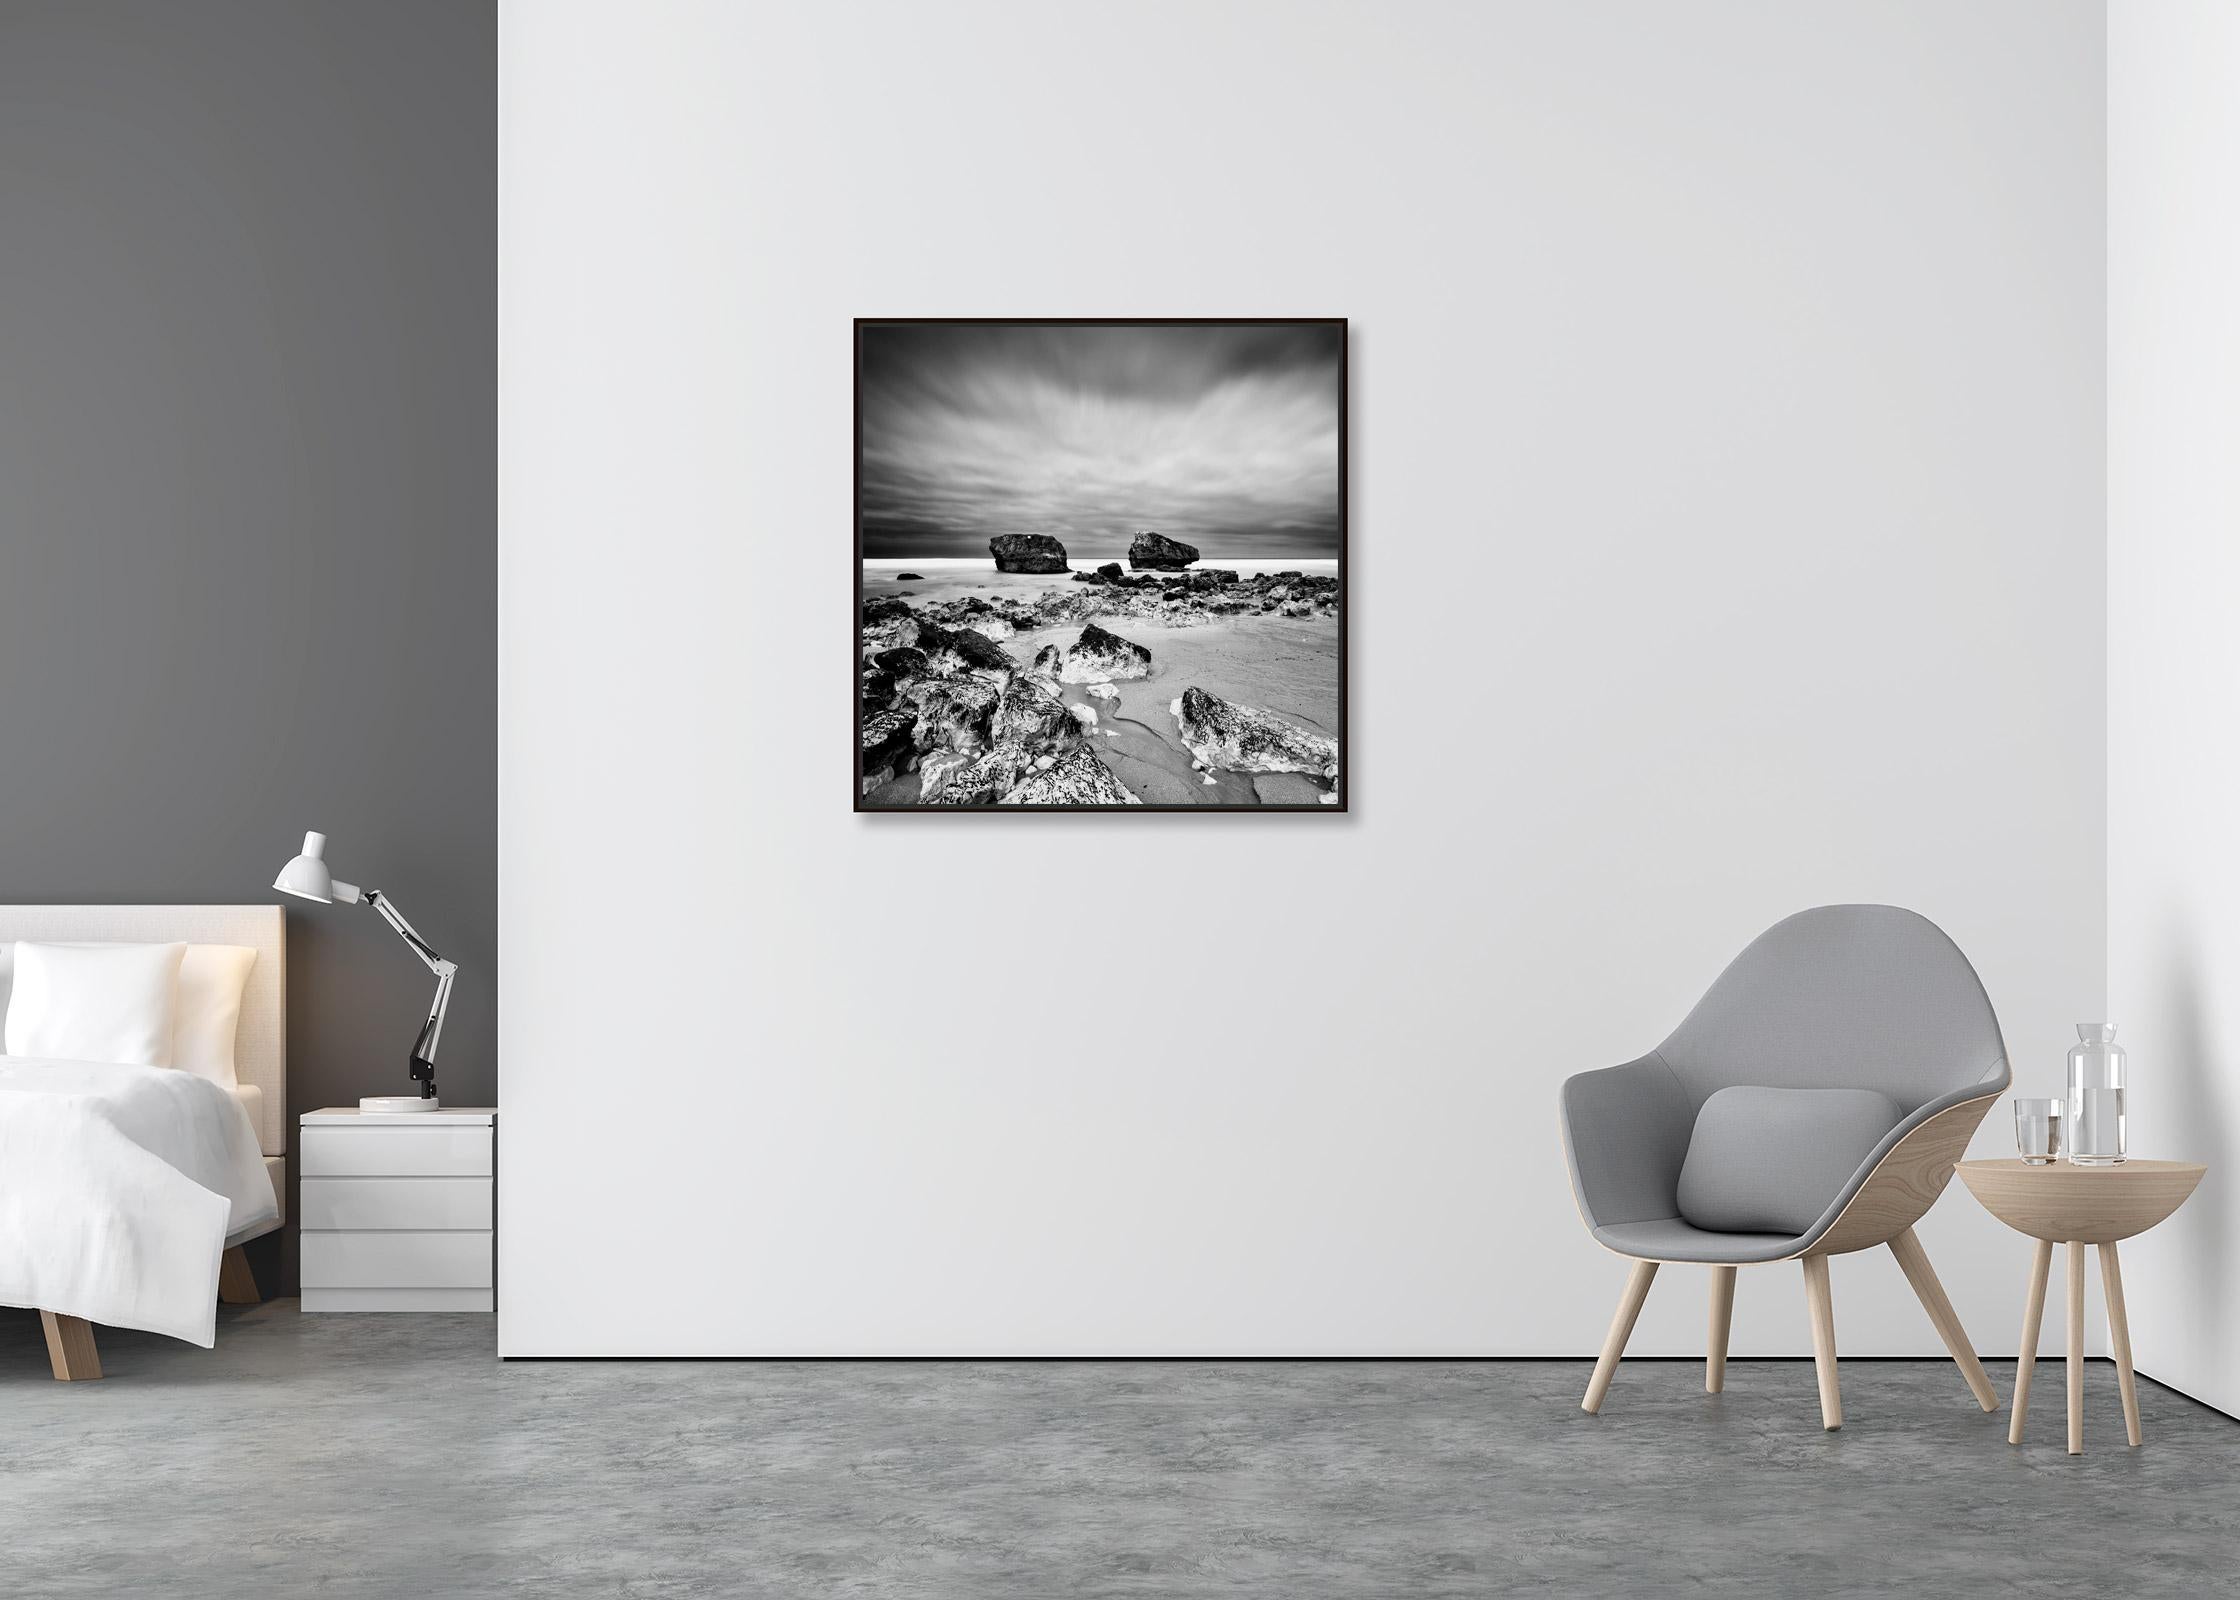 Point de vue, rocky beach, stormy, France, black and white landscape photography - Contemporary Photograph by Gerald Berghammer